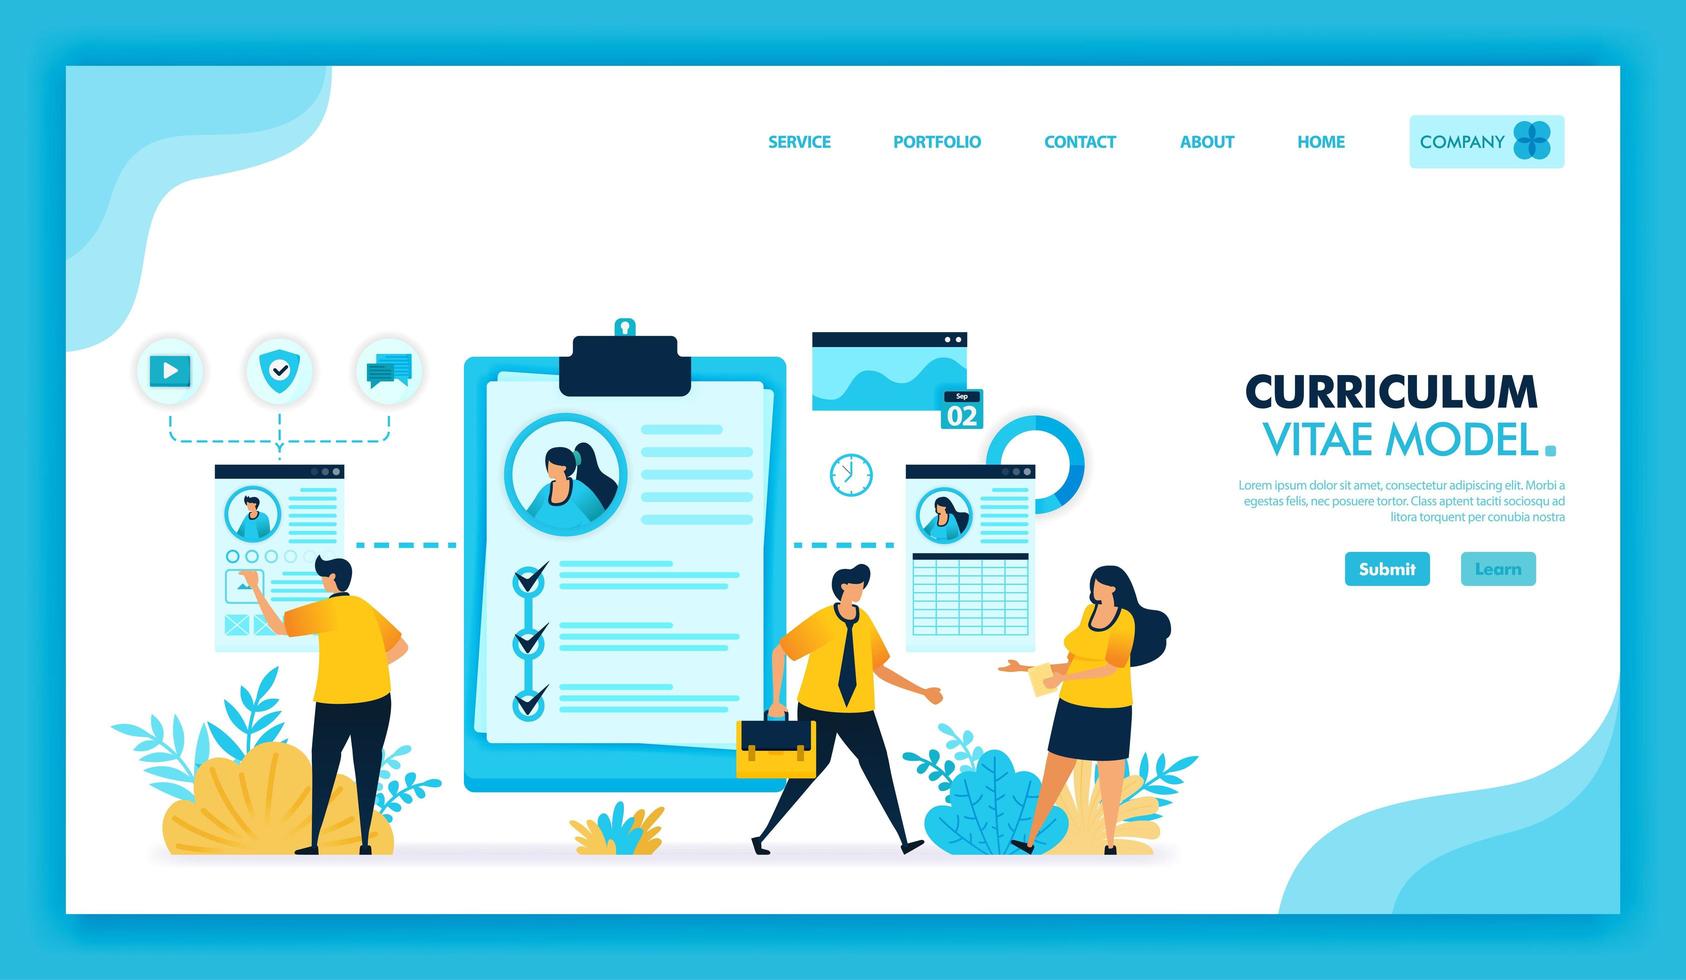 Online curriculum vitae and online cv to register and find work in company. Job search or vacancies platform for fresh graduate job seeker, Corporate hiring employee. Flat illustration vector design.